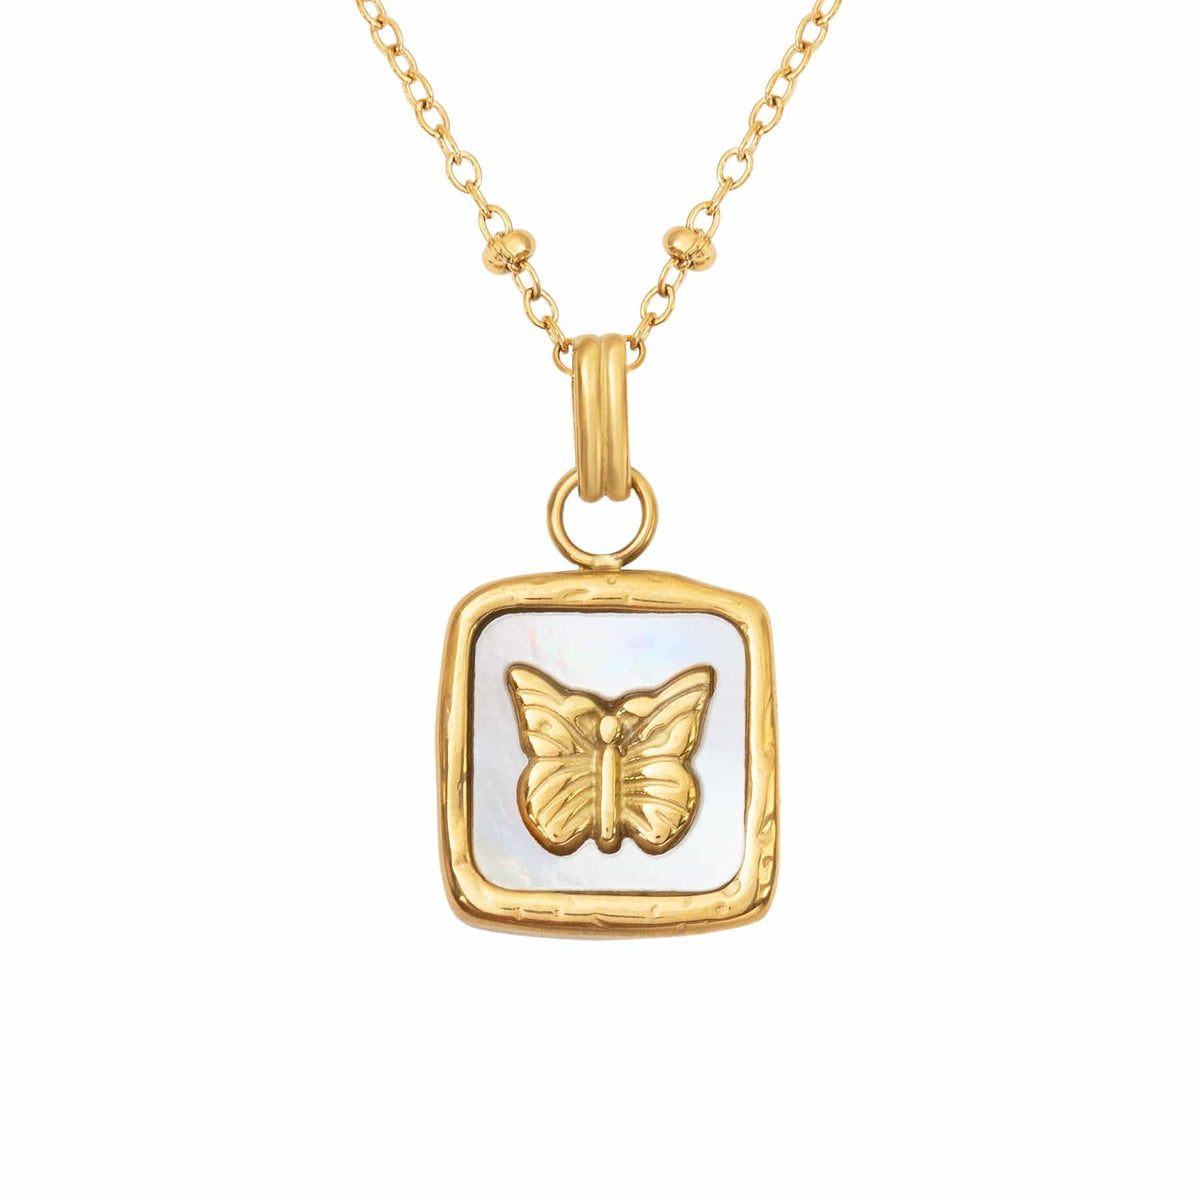 BohoMoon Stainless Steel Samsara Butterfly Necklace Gold